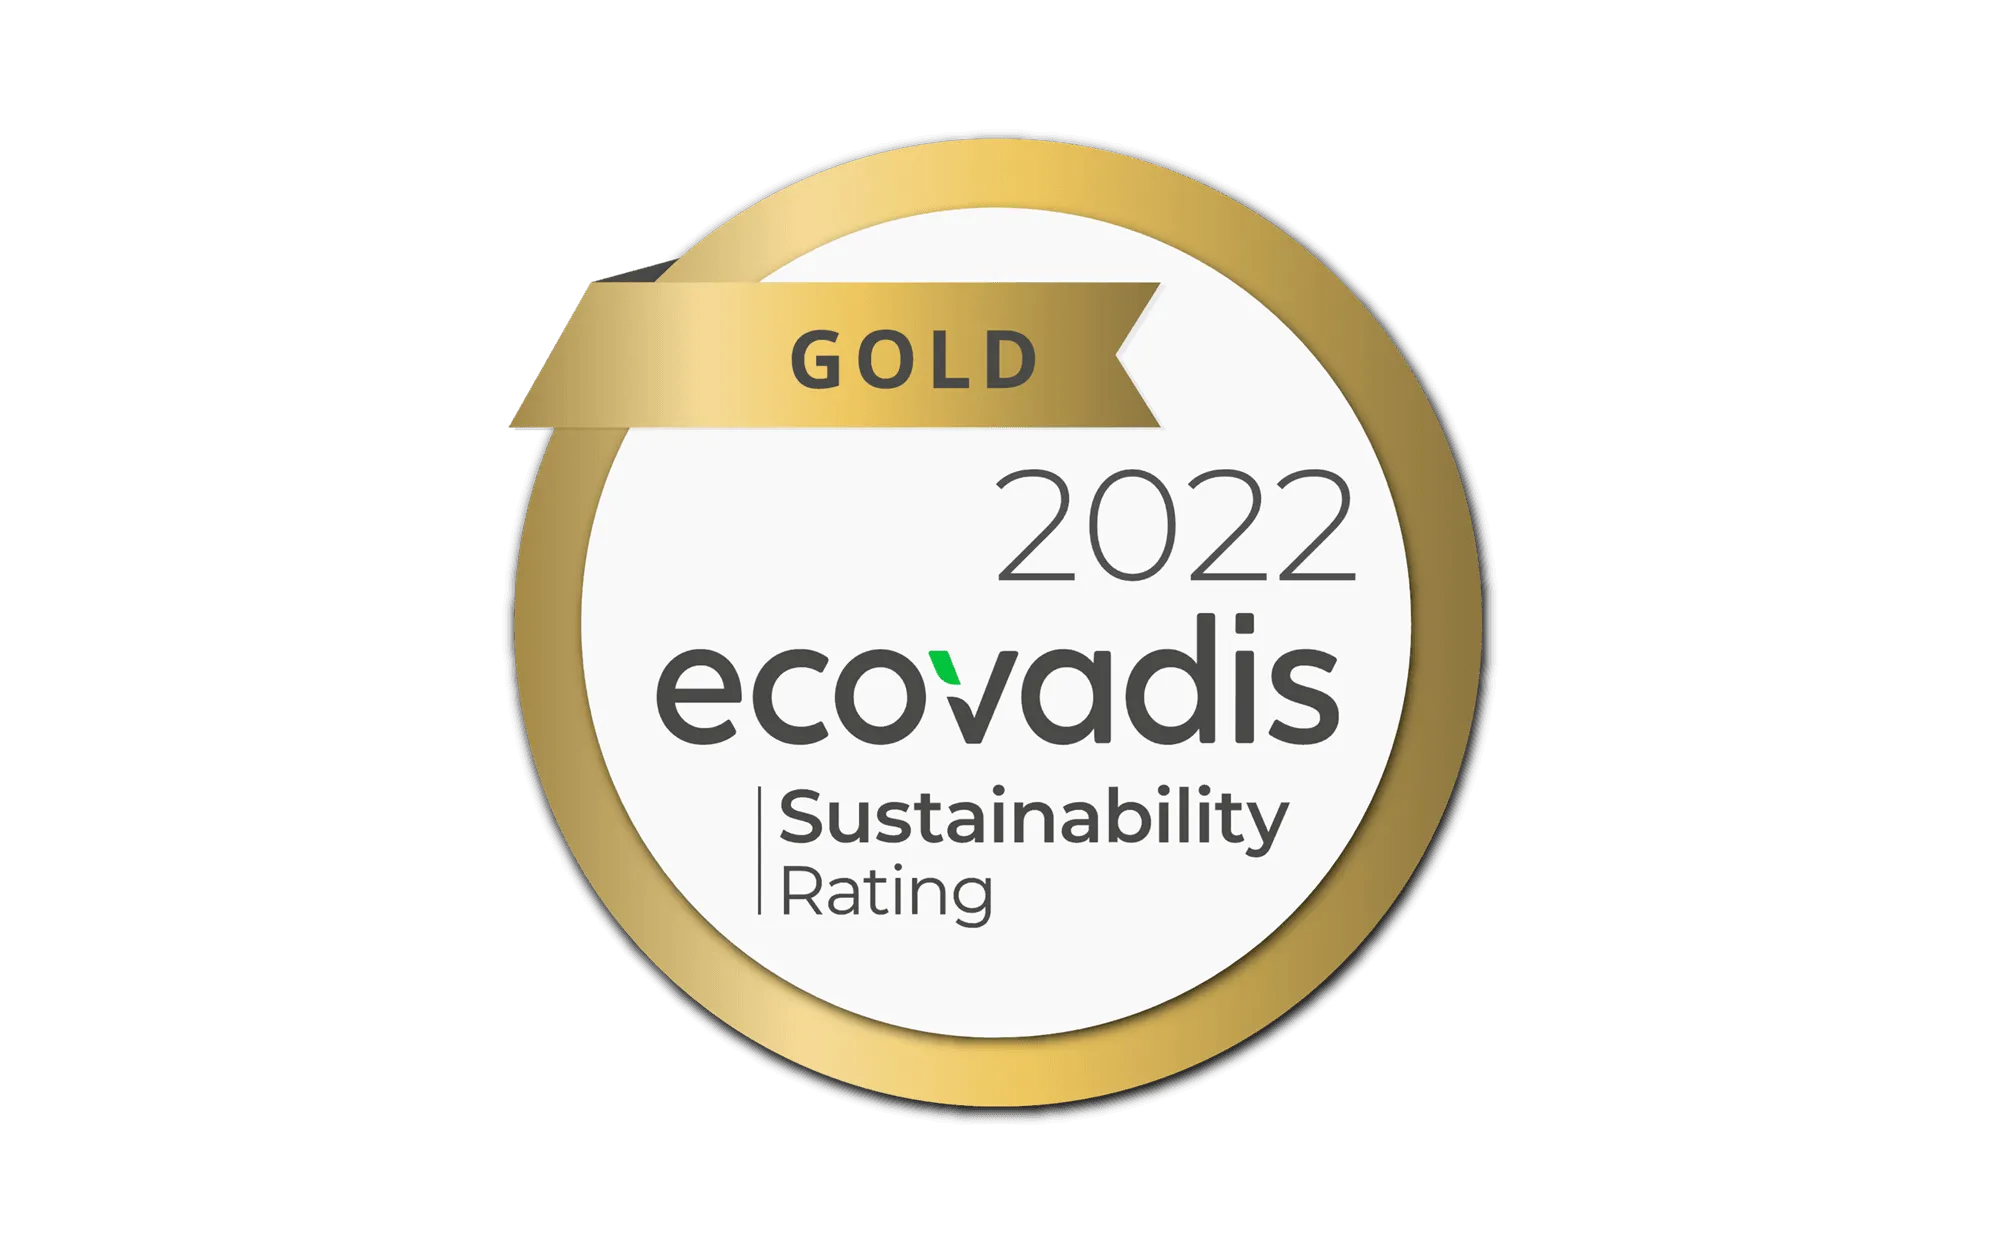 Ecovadis 2022 badge with gold sustainability rating